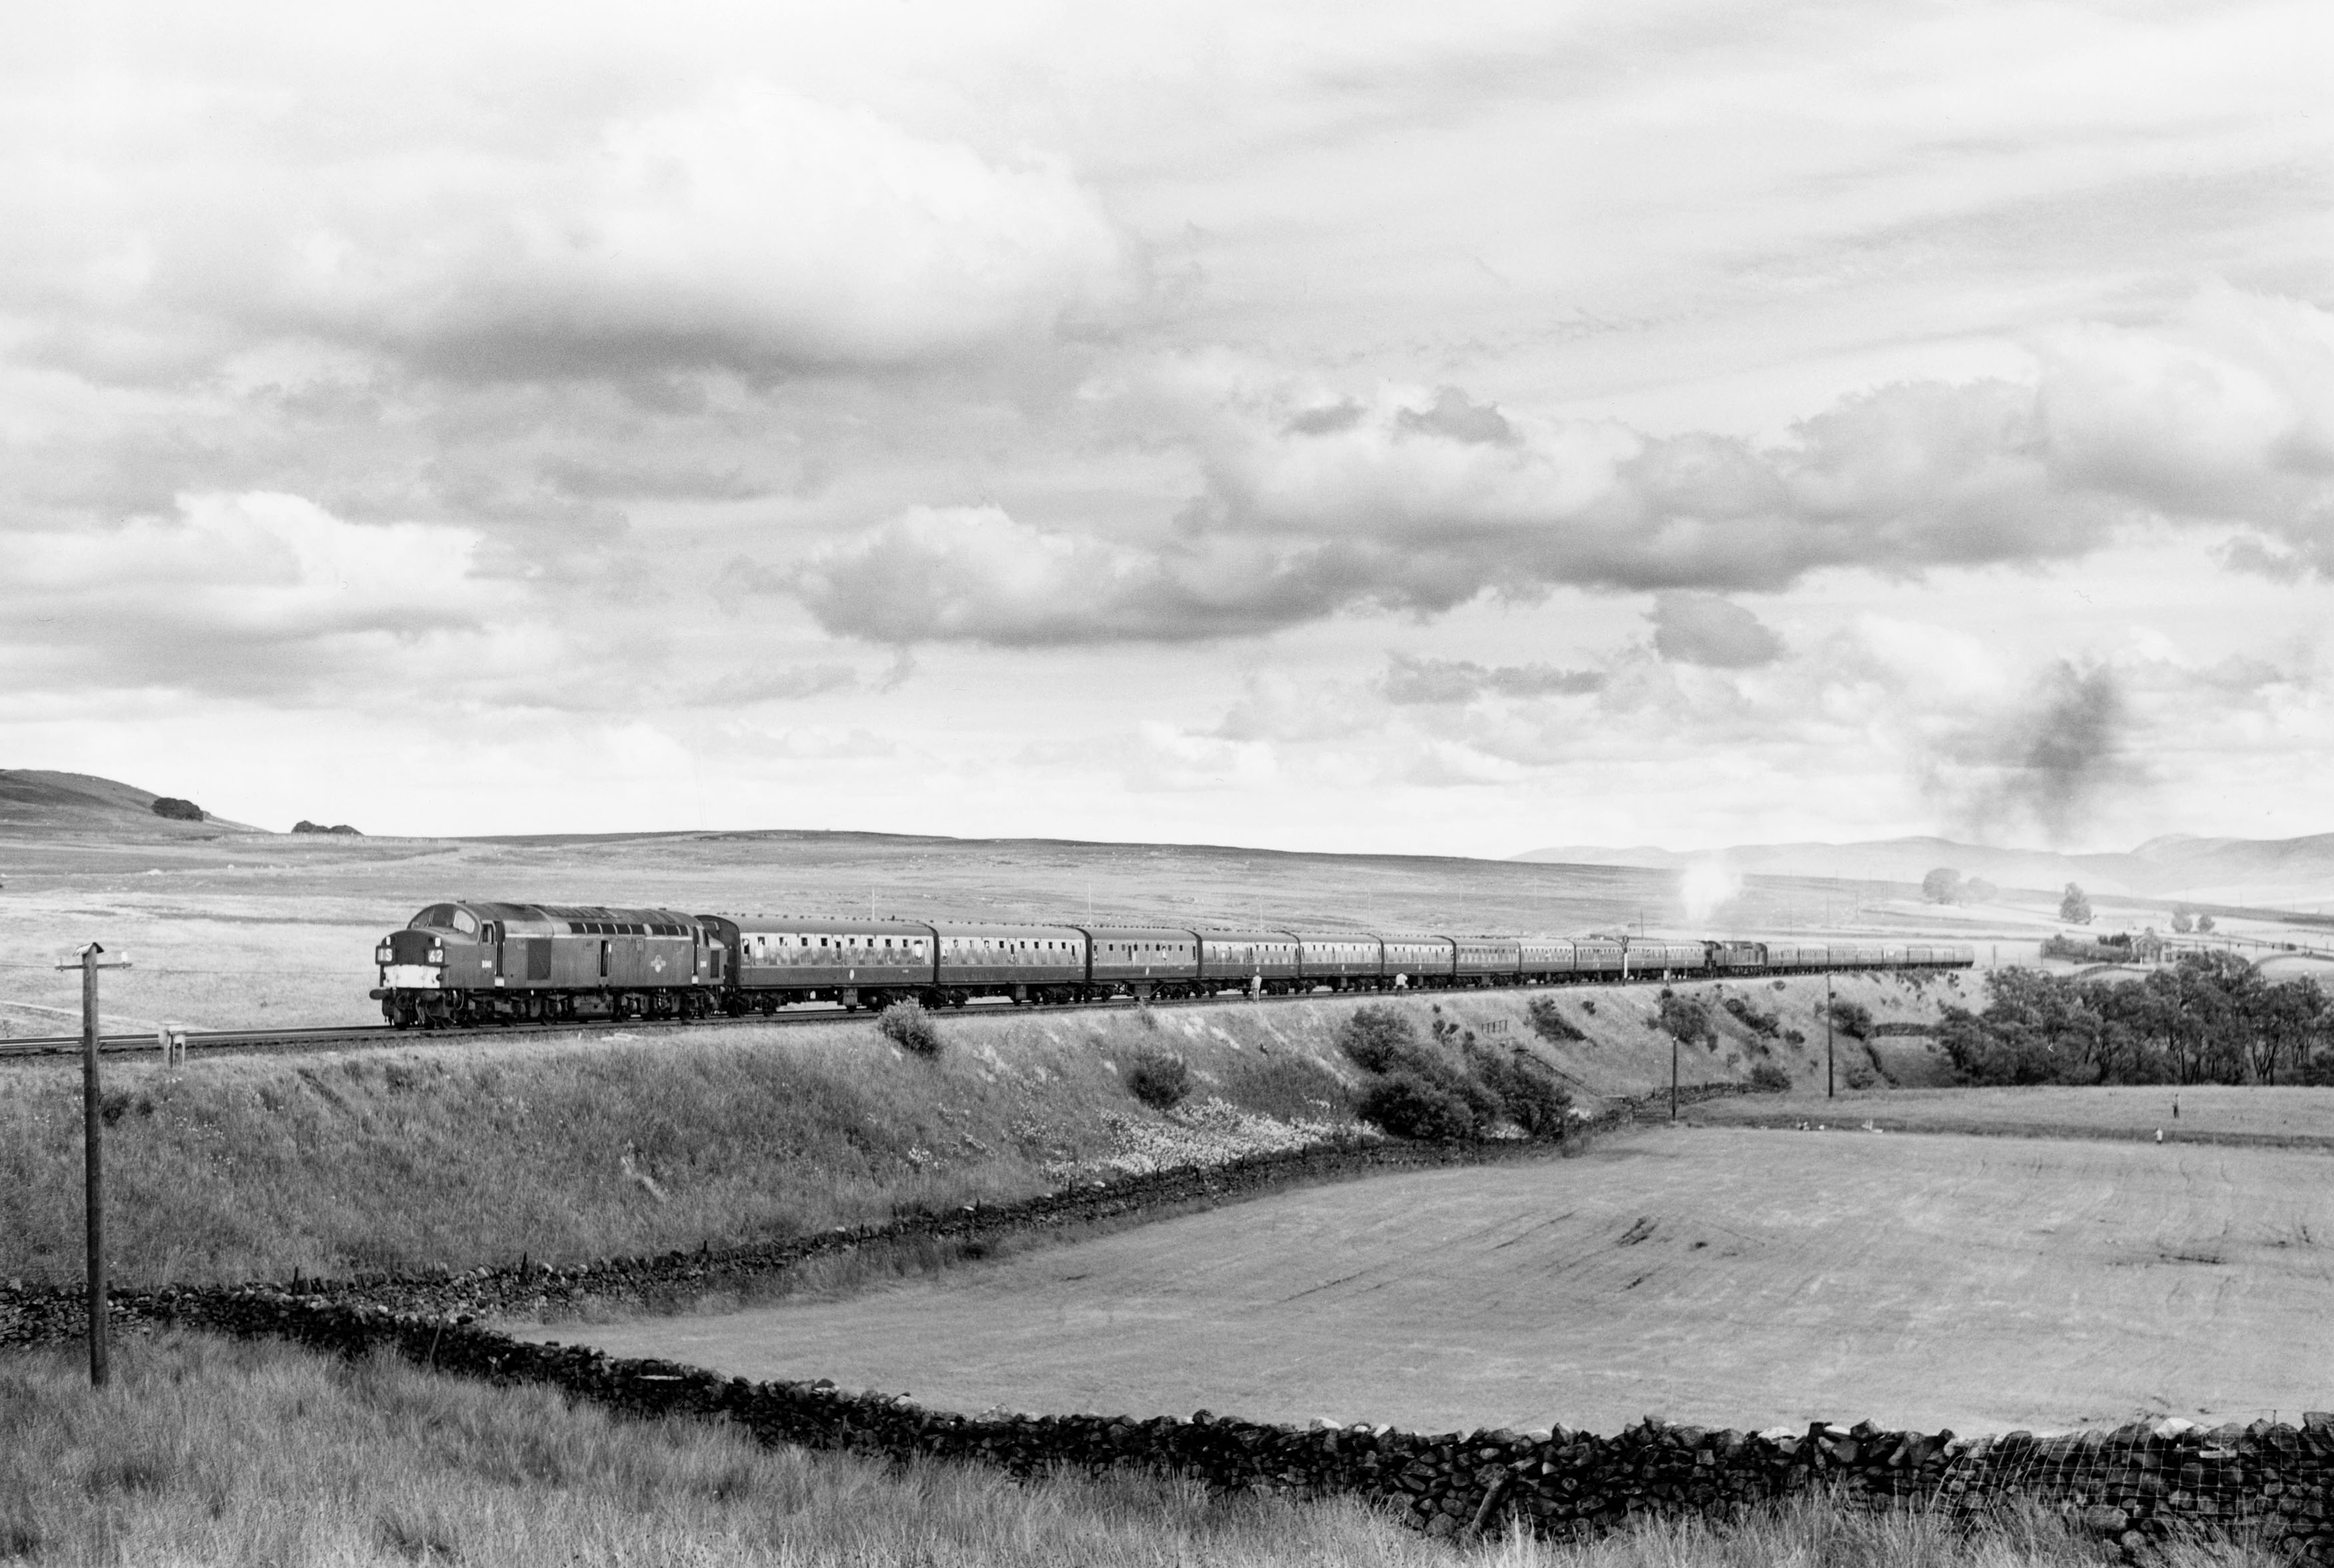 The incline at Shap is another favourite amongst photographers. I like this image as it shows a Class 40 battling up the line, rather than a more traditional steam locomotive shot.